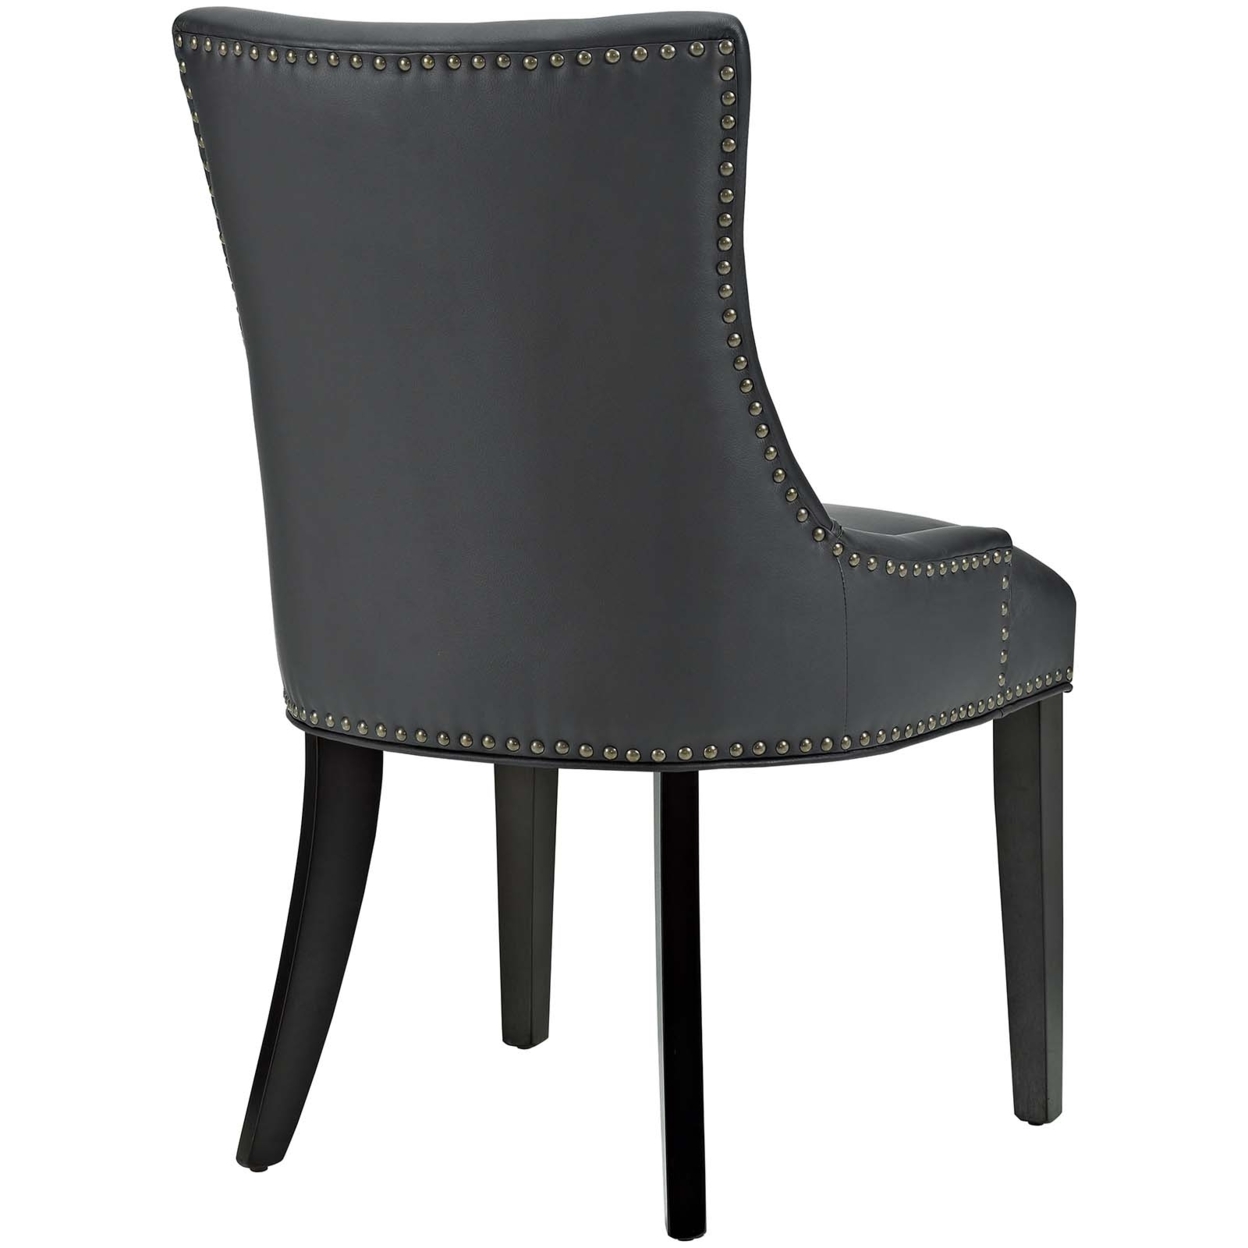 Marquis Faux Leather Dining Chair, Black